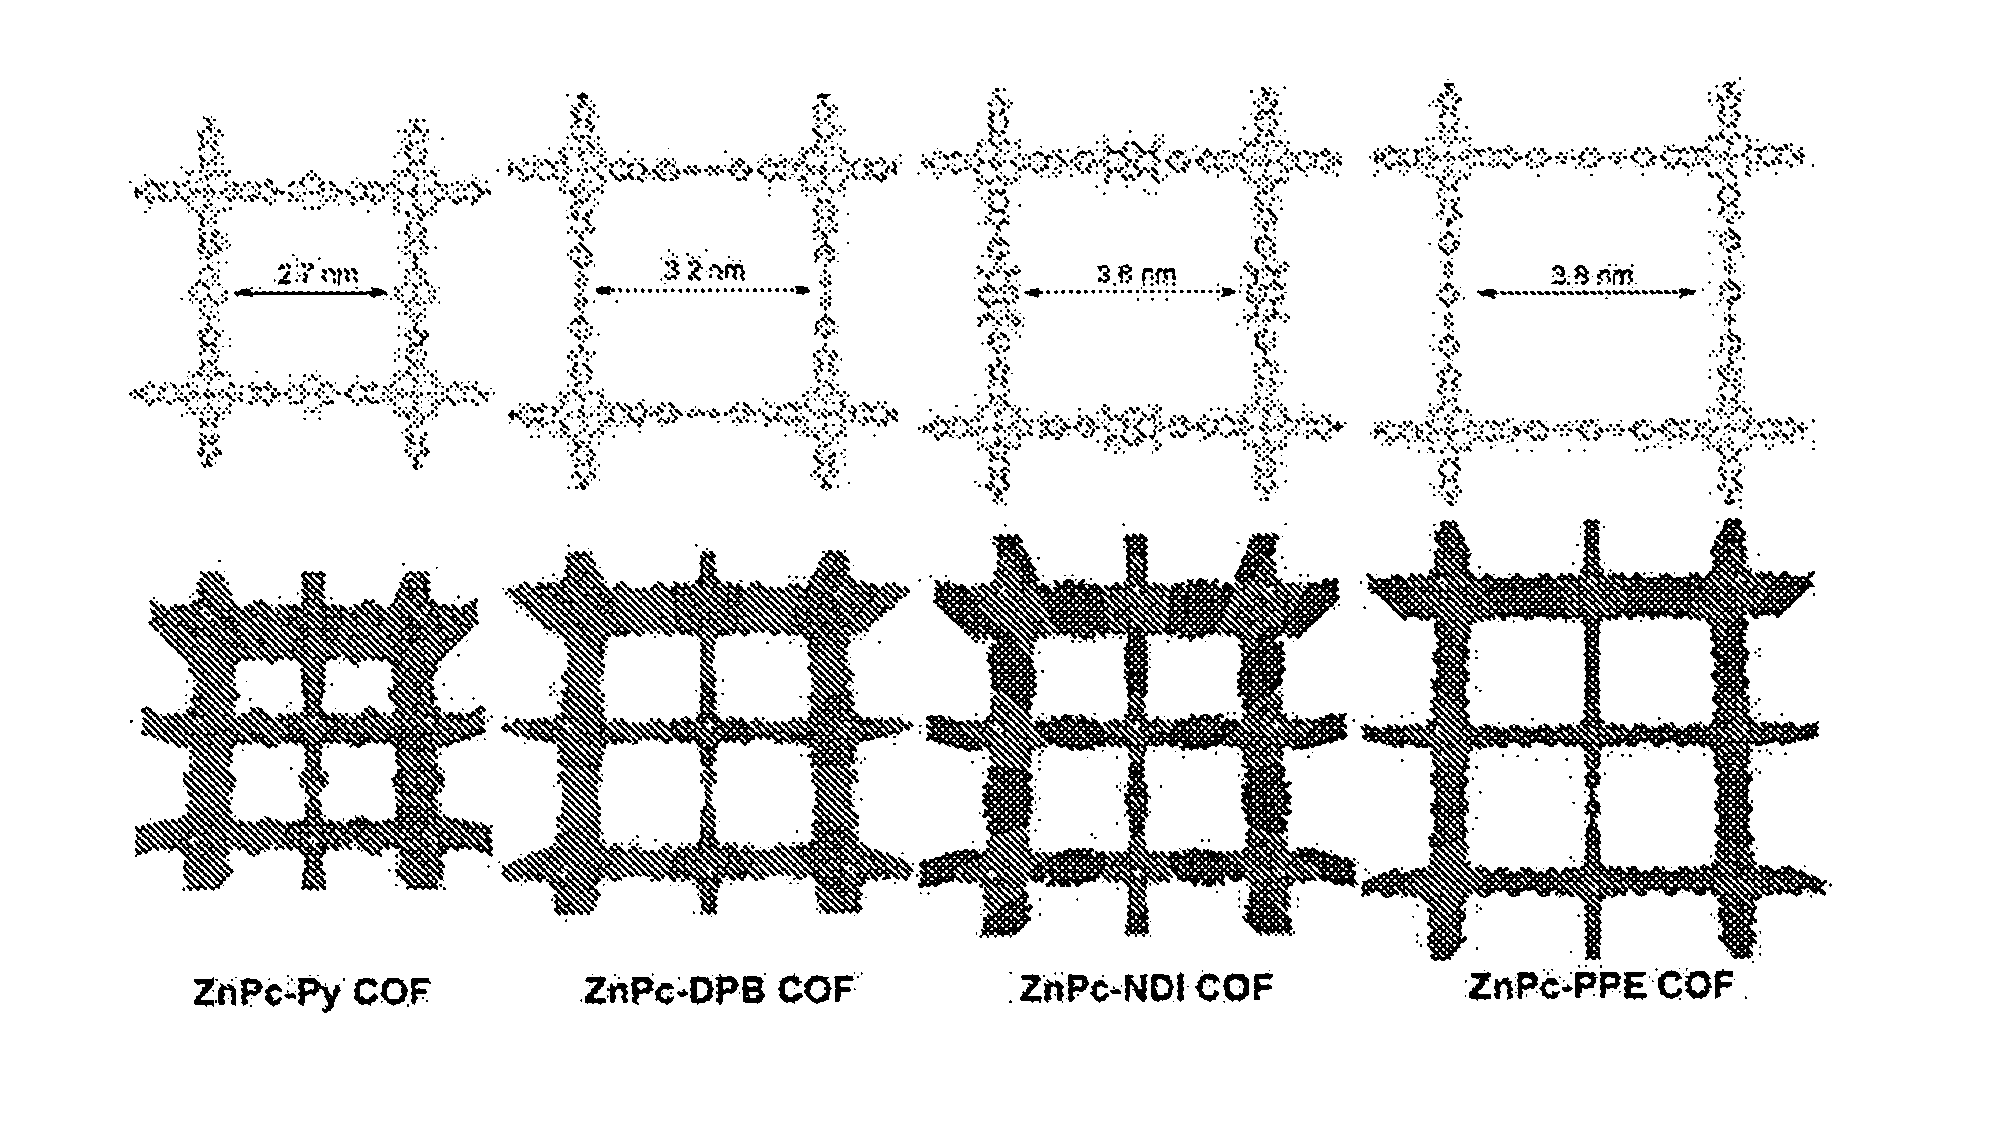 Covalent organic framework films, and methods of making and uses of same